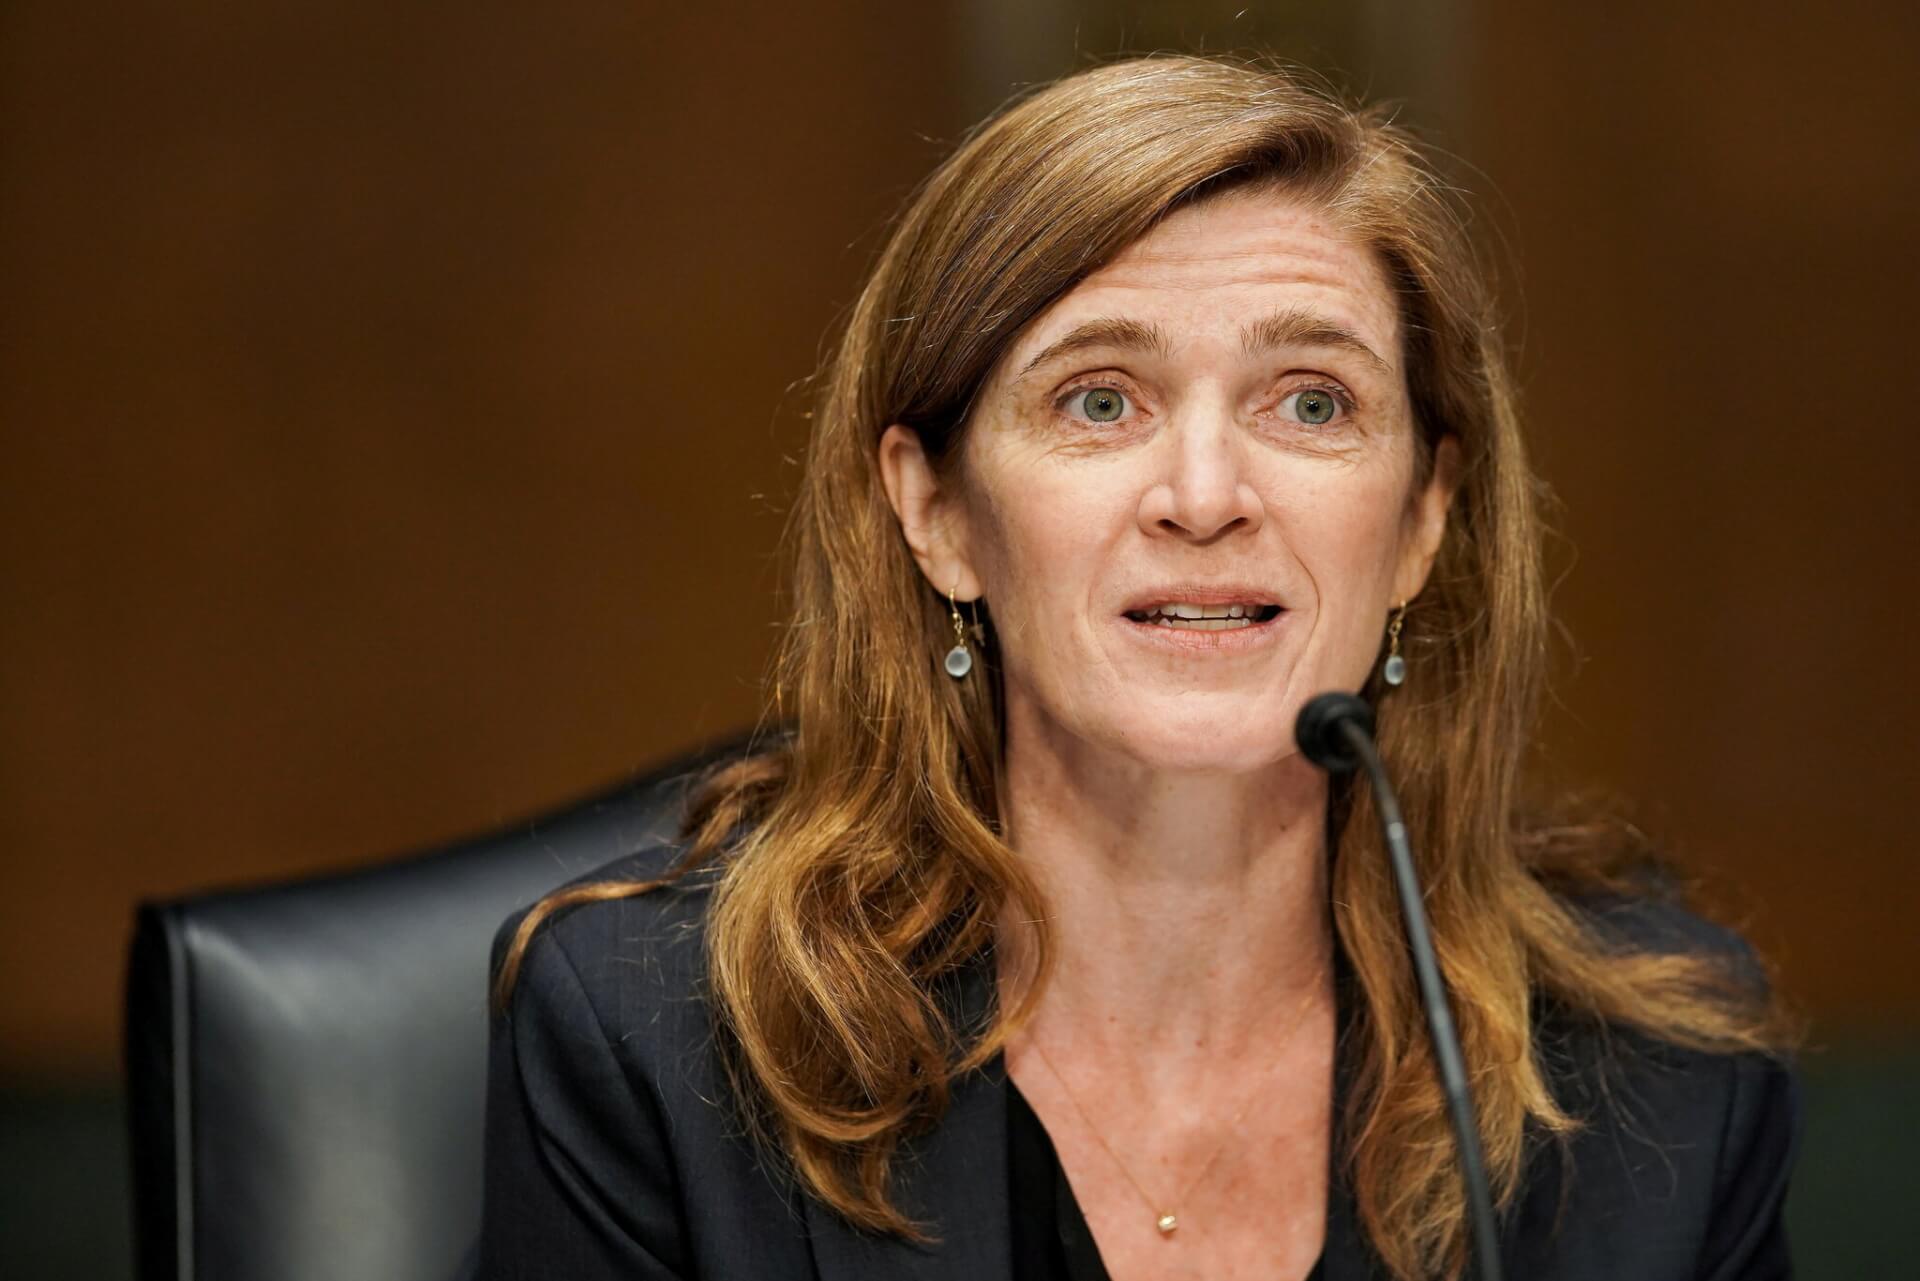 USAID Chief Concerned over “Dehumanising Rhetoric” Used by Ethiopia Amid Tigray Crisis